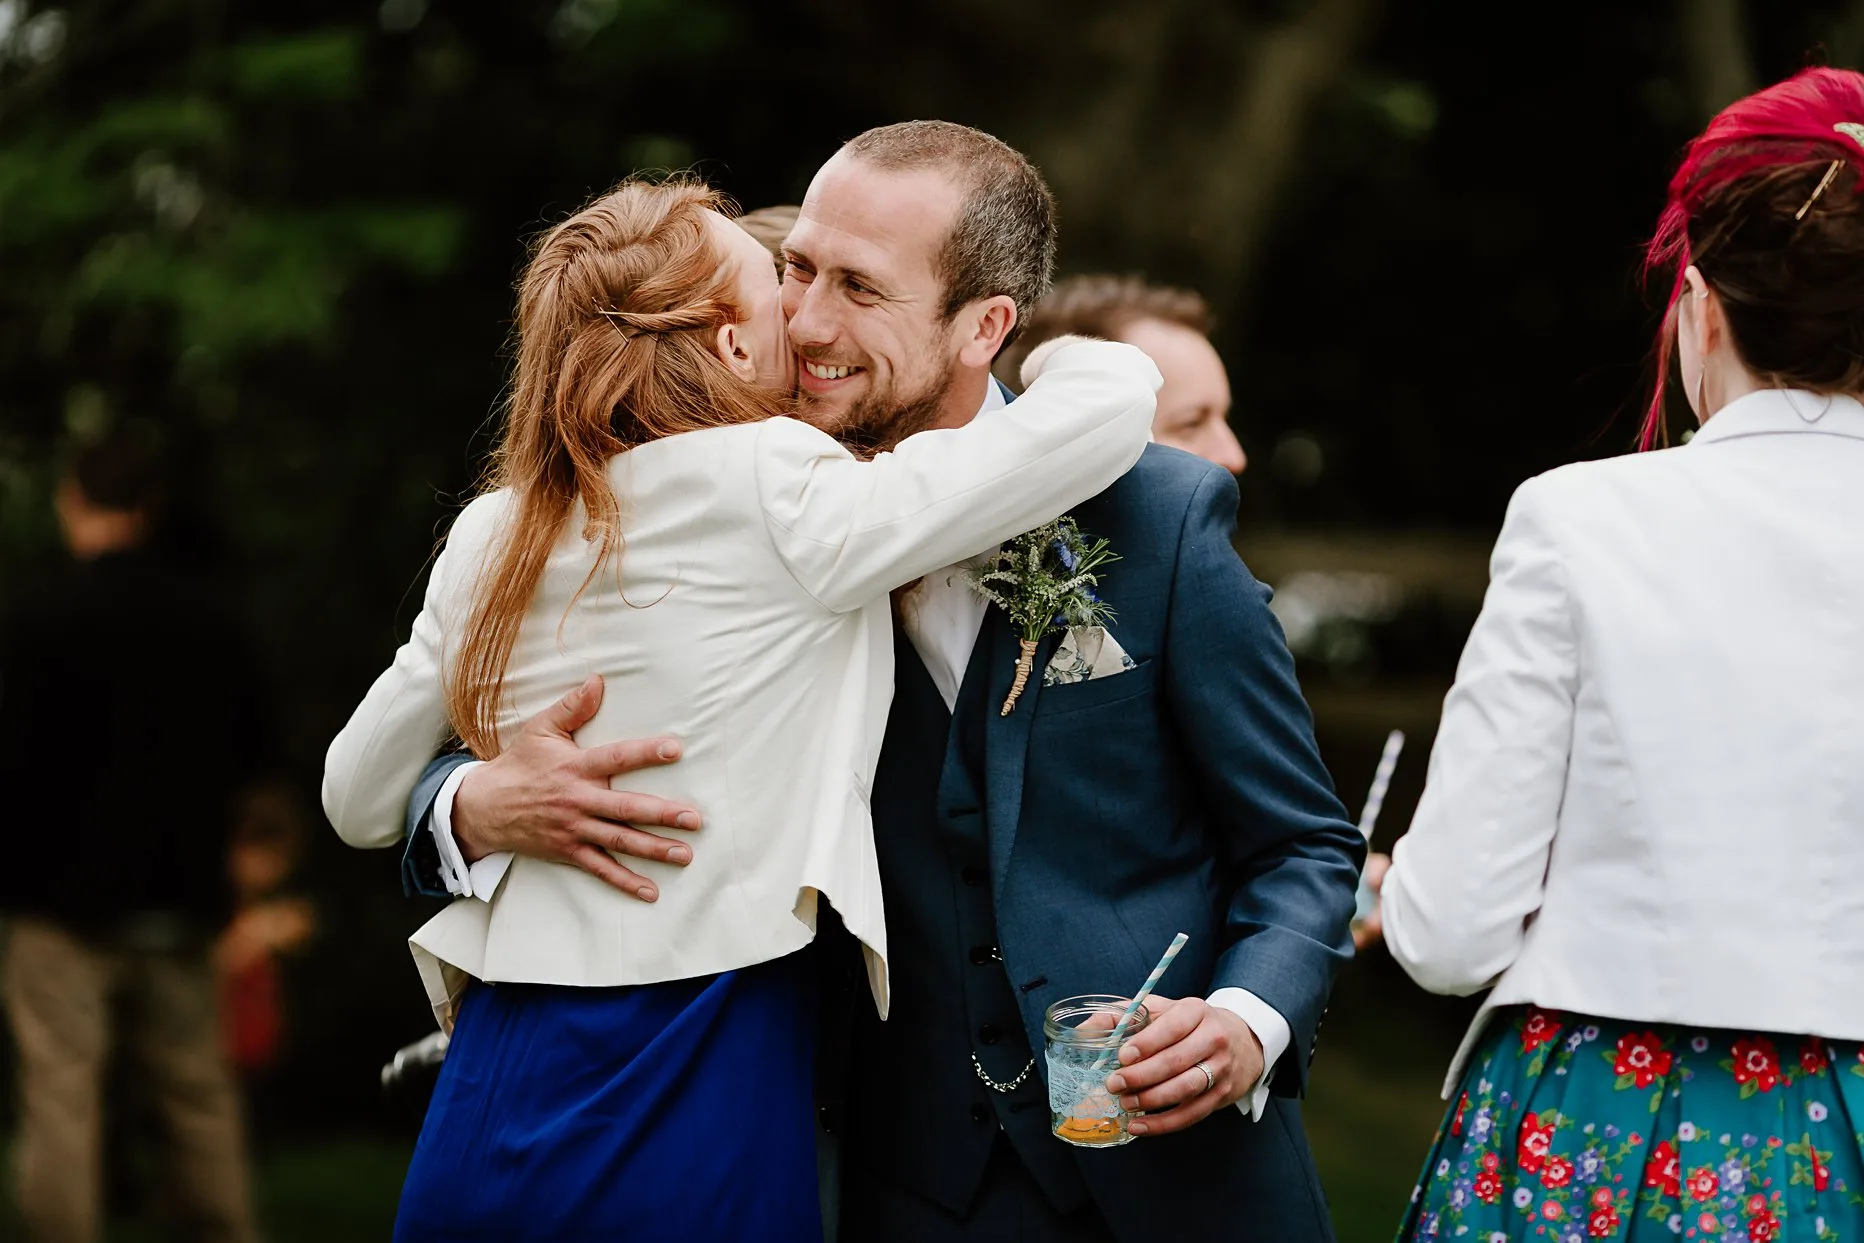 Natural photo of the Groom hugging a wedding guest and smiling during the drinks reception.